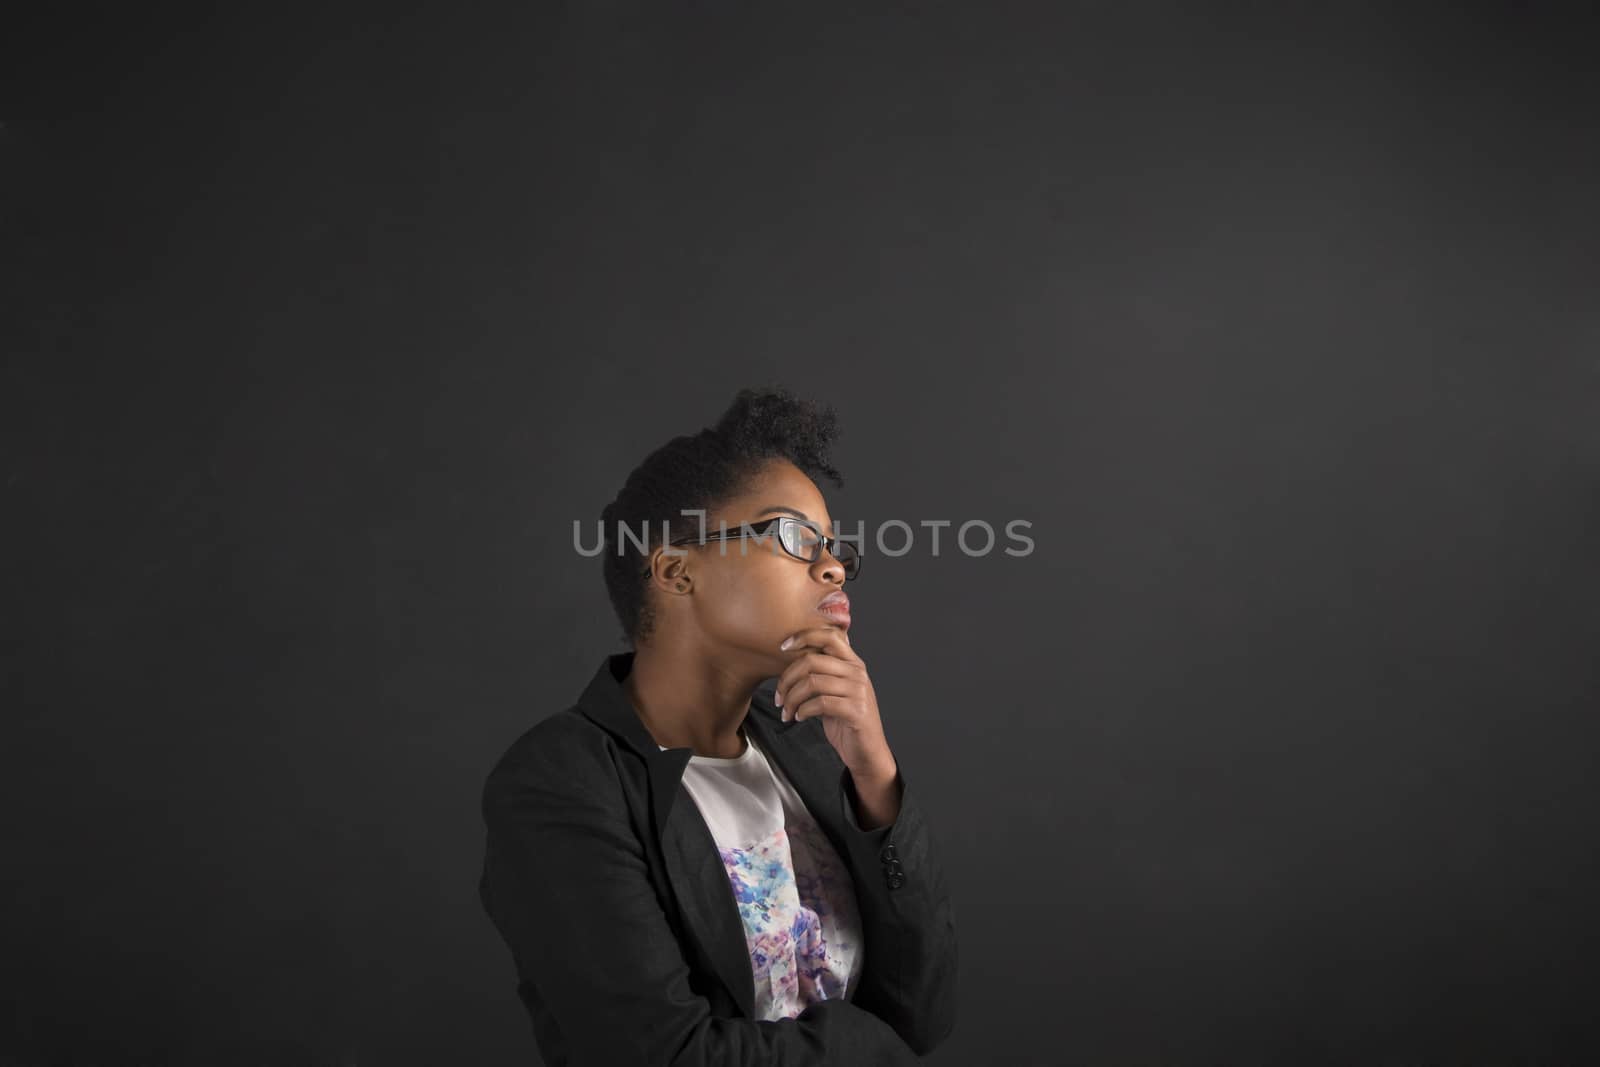 South African or African American black woman teacher or student with her hand on her chin whilst thinking standing against a chalk blackboard background inside